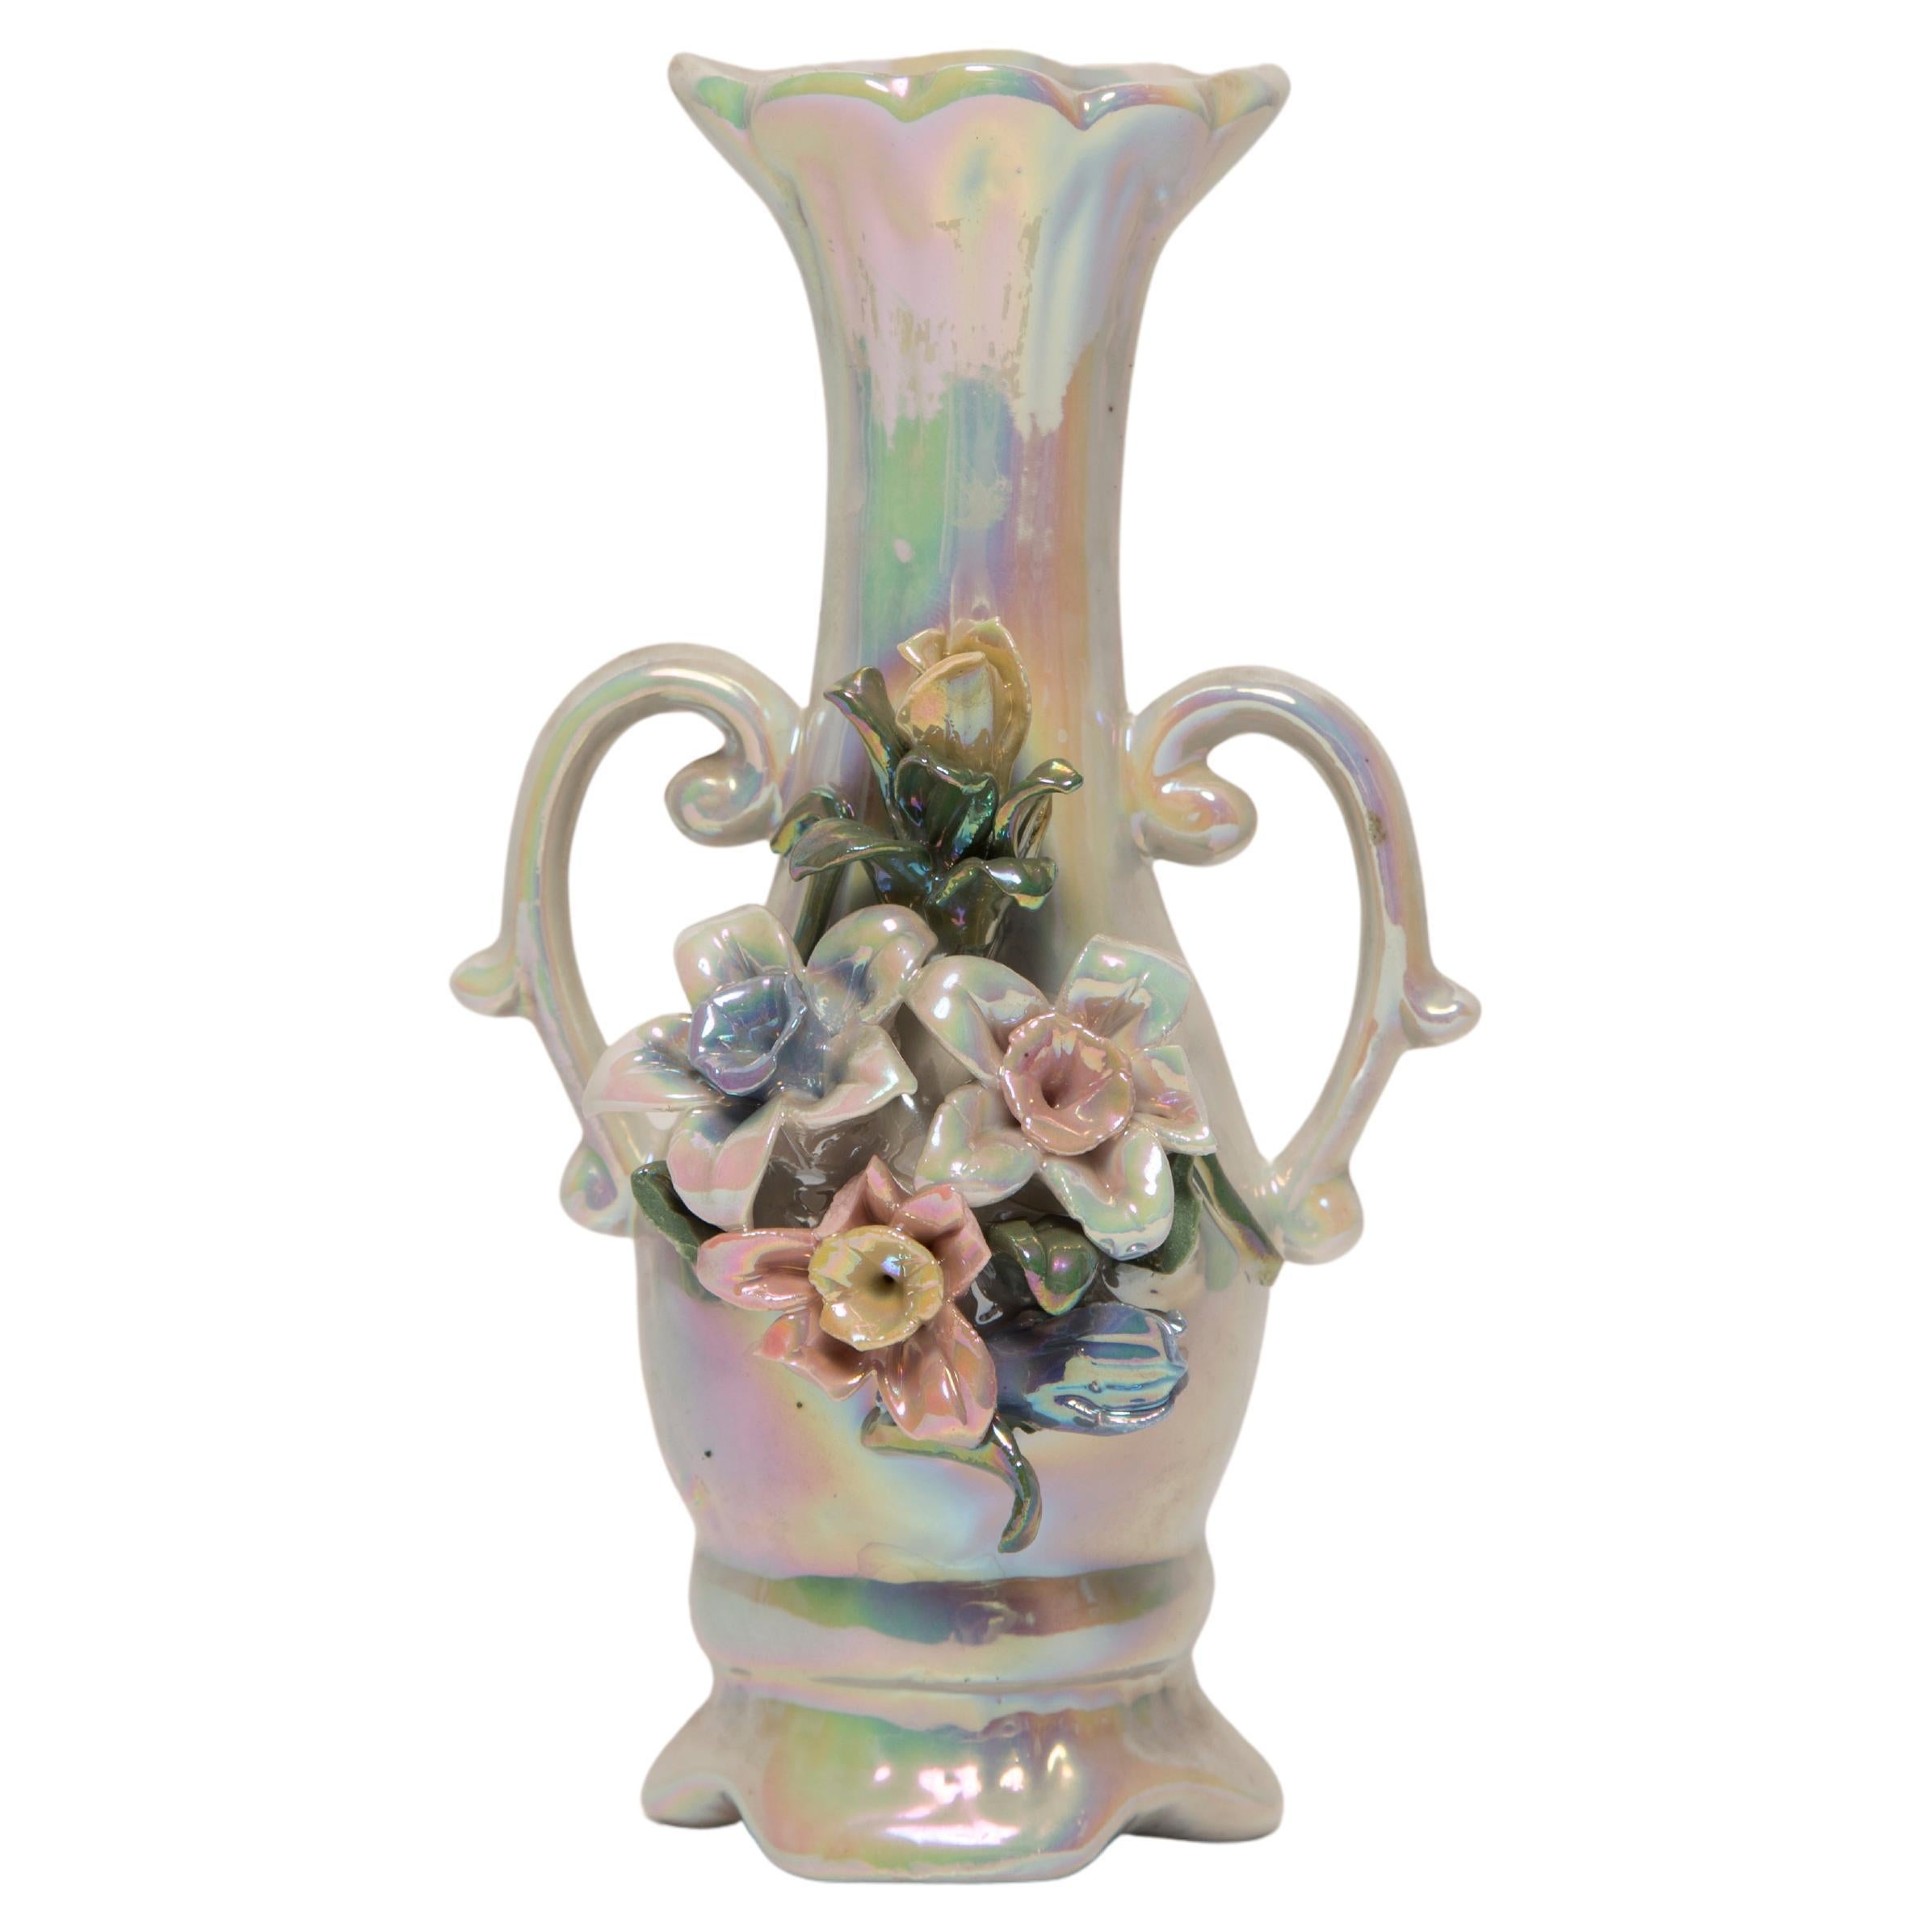 Midcentury Vintage Roses Small Porcelain Glossy Vase, Italy, 1960s For Sale